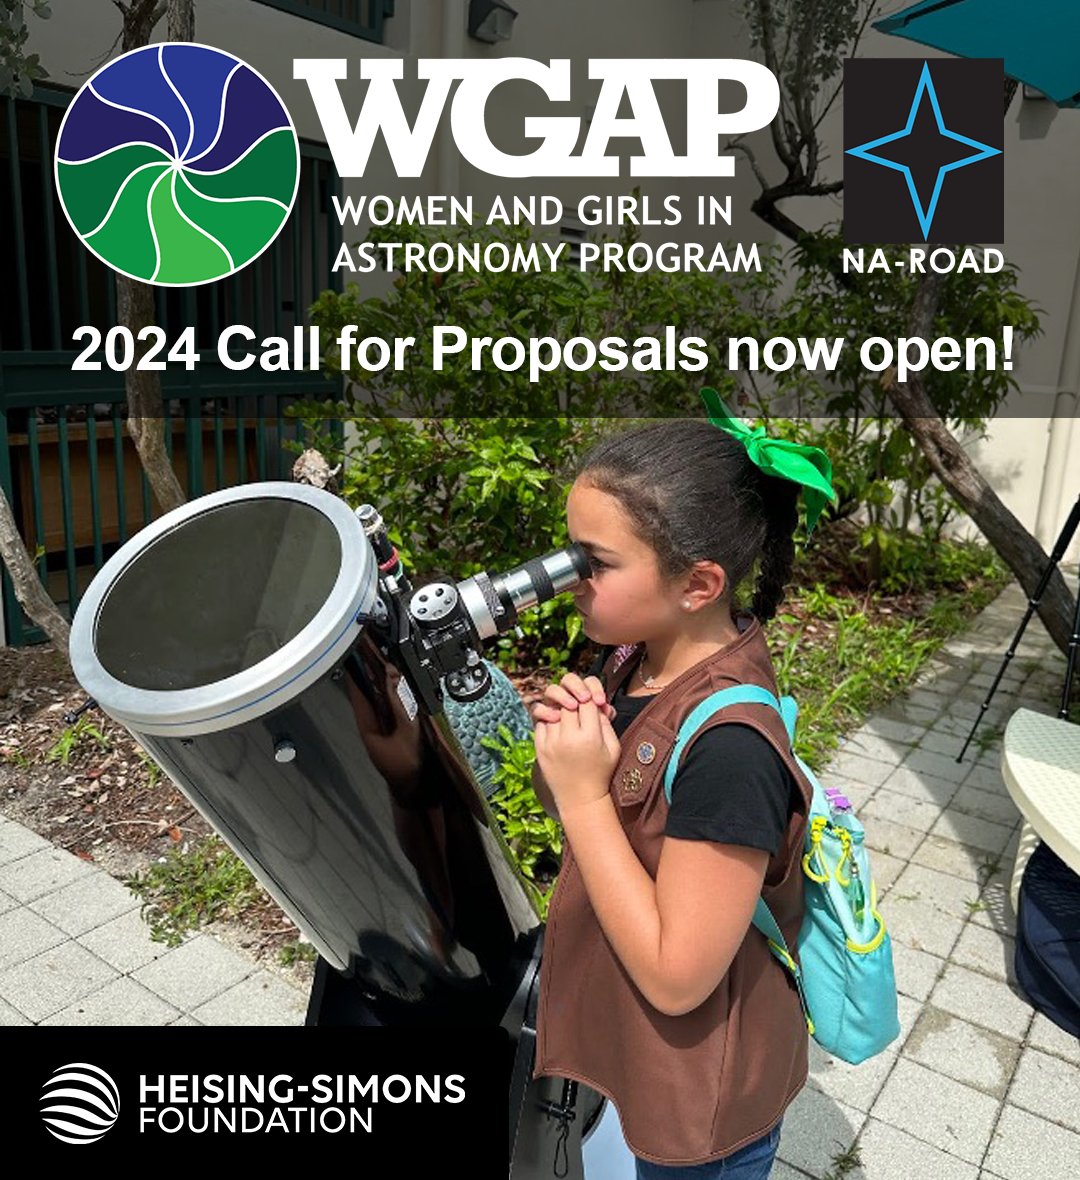 On this #InternationalWomensDay support women and girls in #STEM! Apply for a $2,000 grant for a project that supports women and girls in #astronomy! Learn more here: naroad.astro4dev.org/na-road-projec…